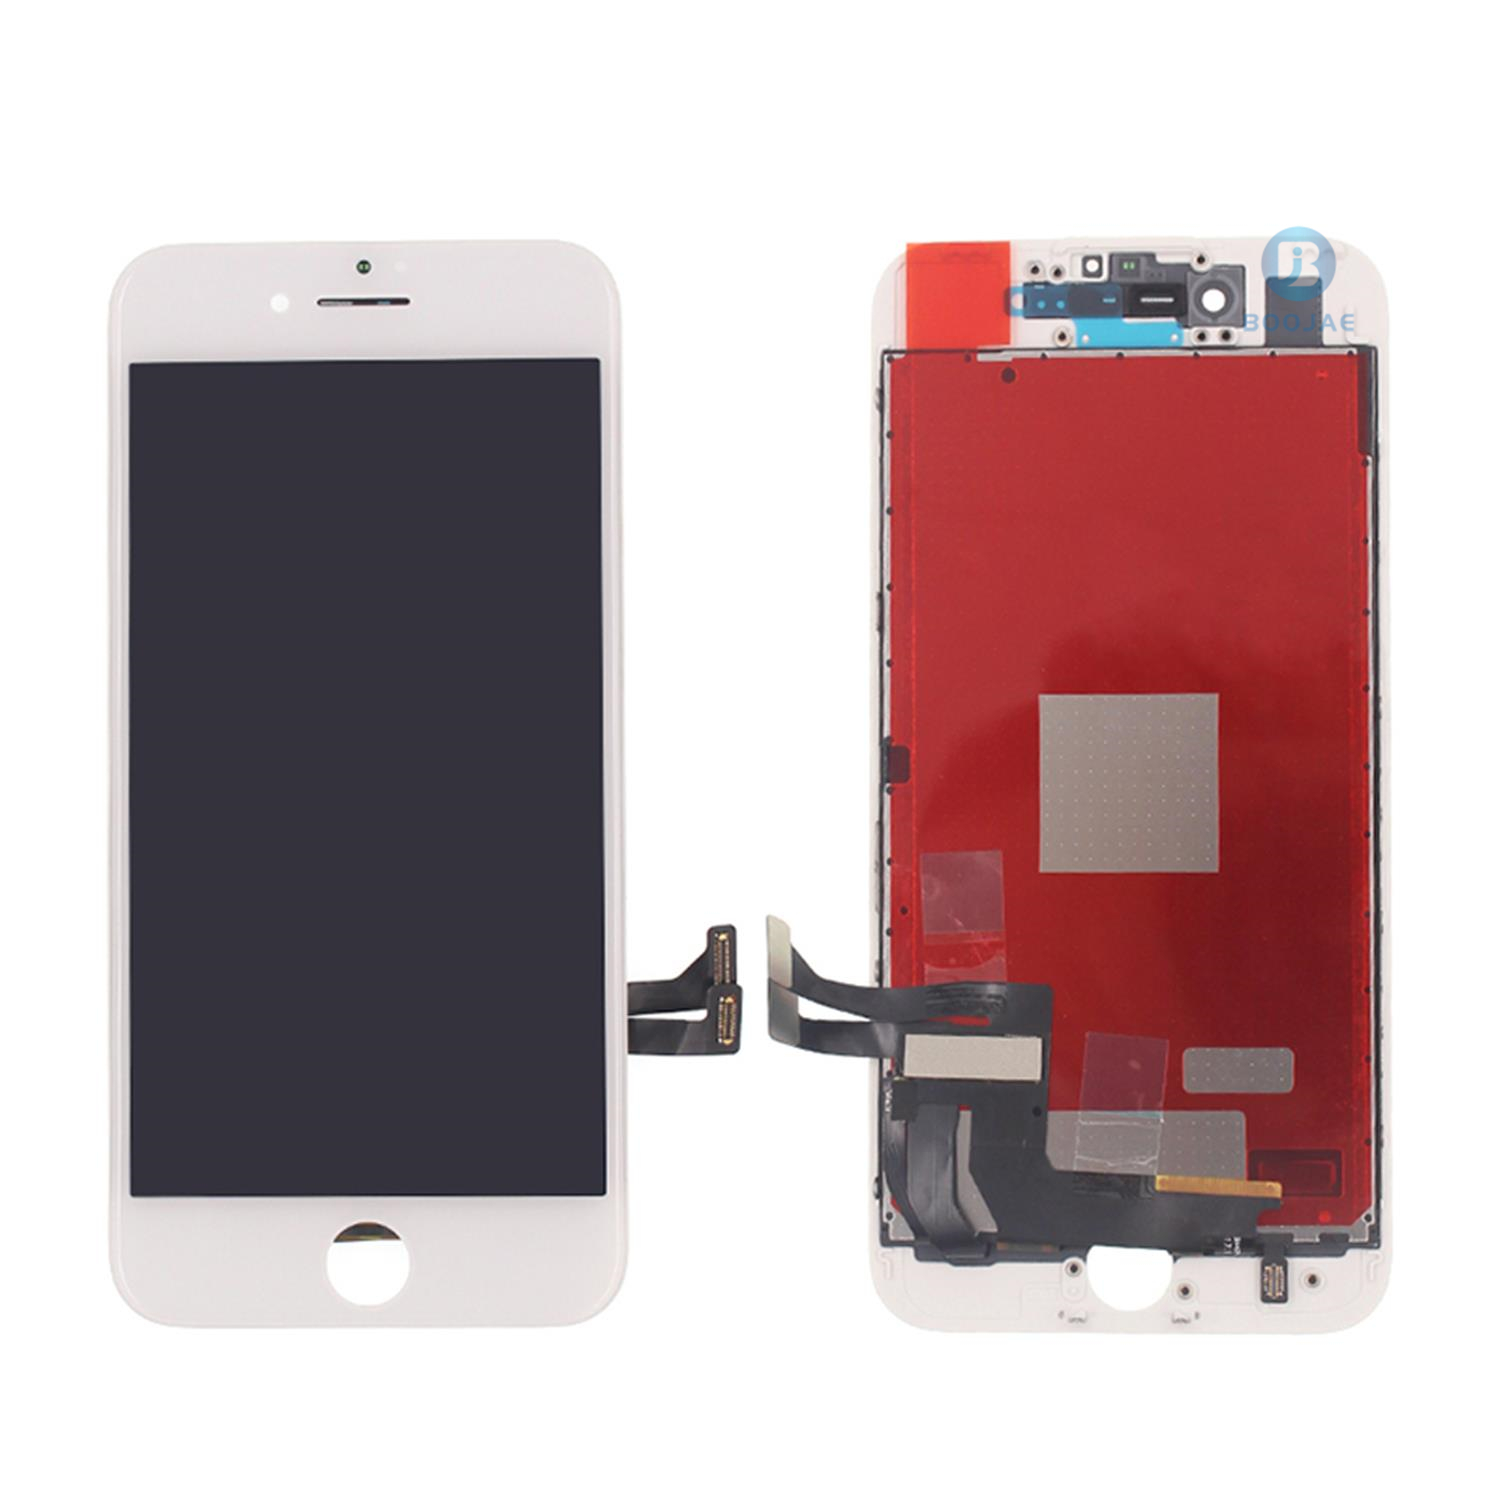 iPhone 7 LCD Screen Display and Touch Panel Digitizer Assembly Replacement